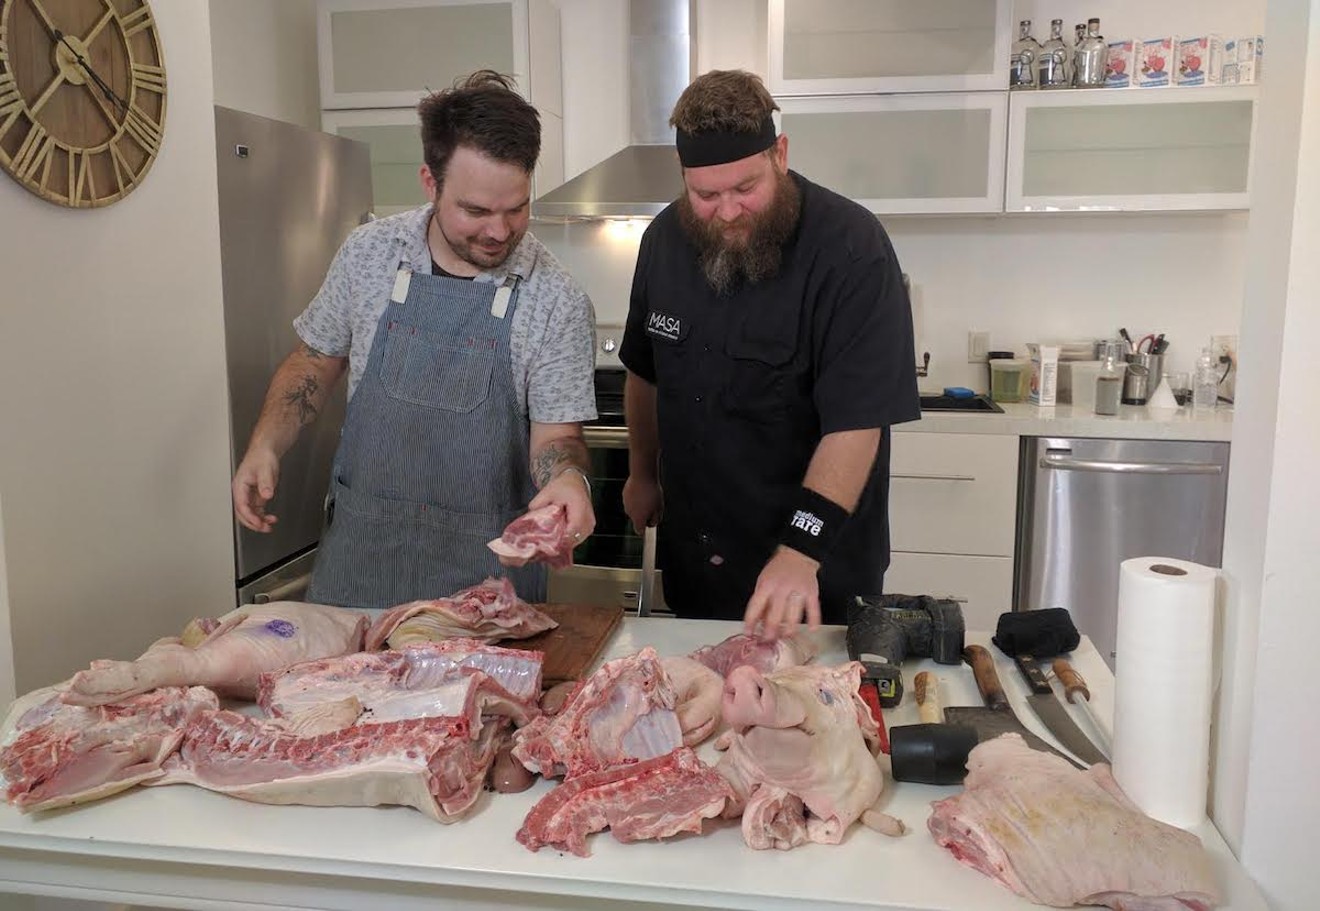 Miami chef Jeremiah Bullfrog (right) looks over pig parts during an episode of his cooking series, Jeremiah Bullfrog Forks It.